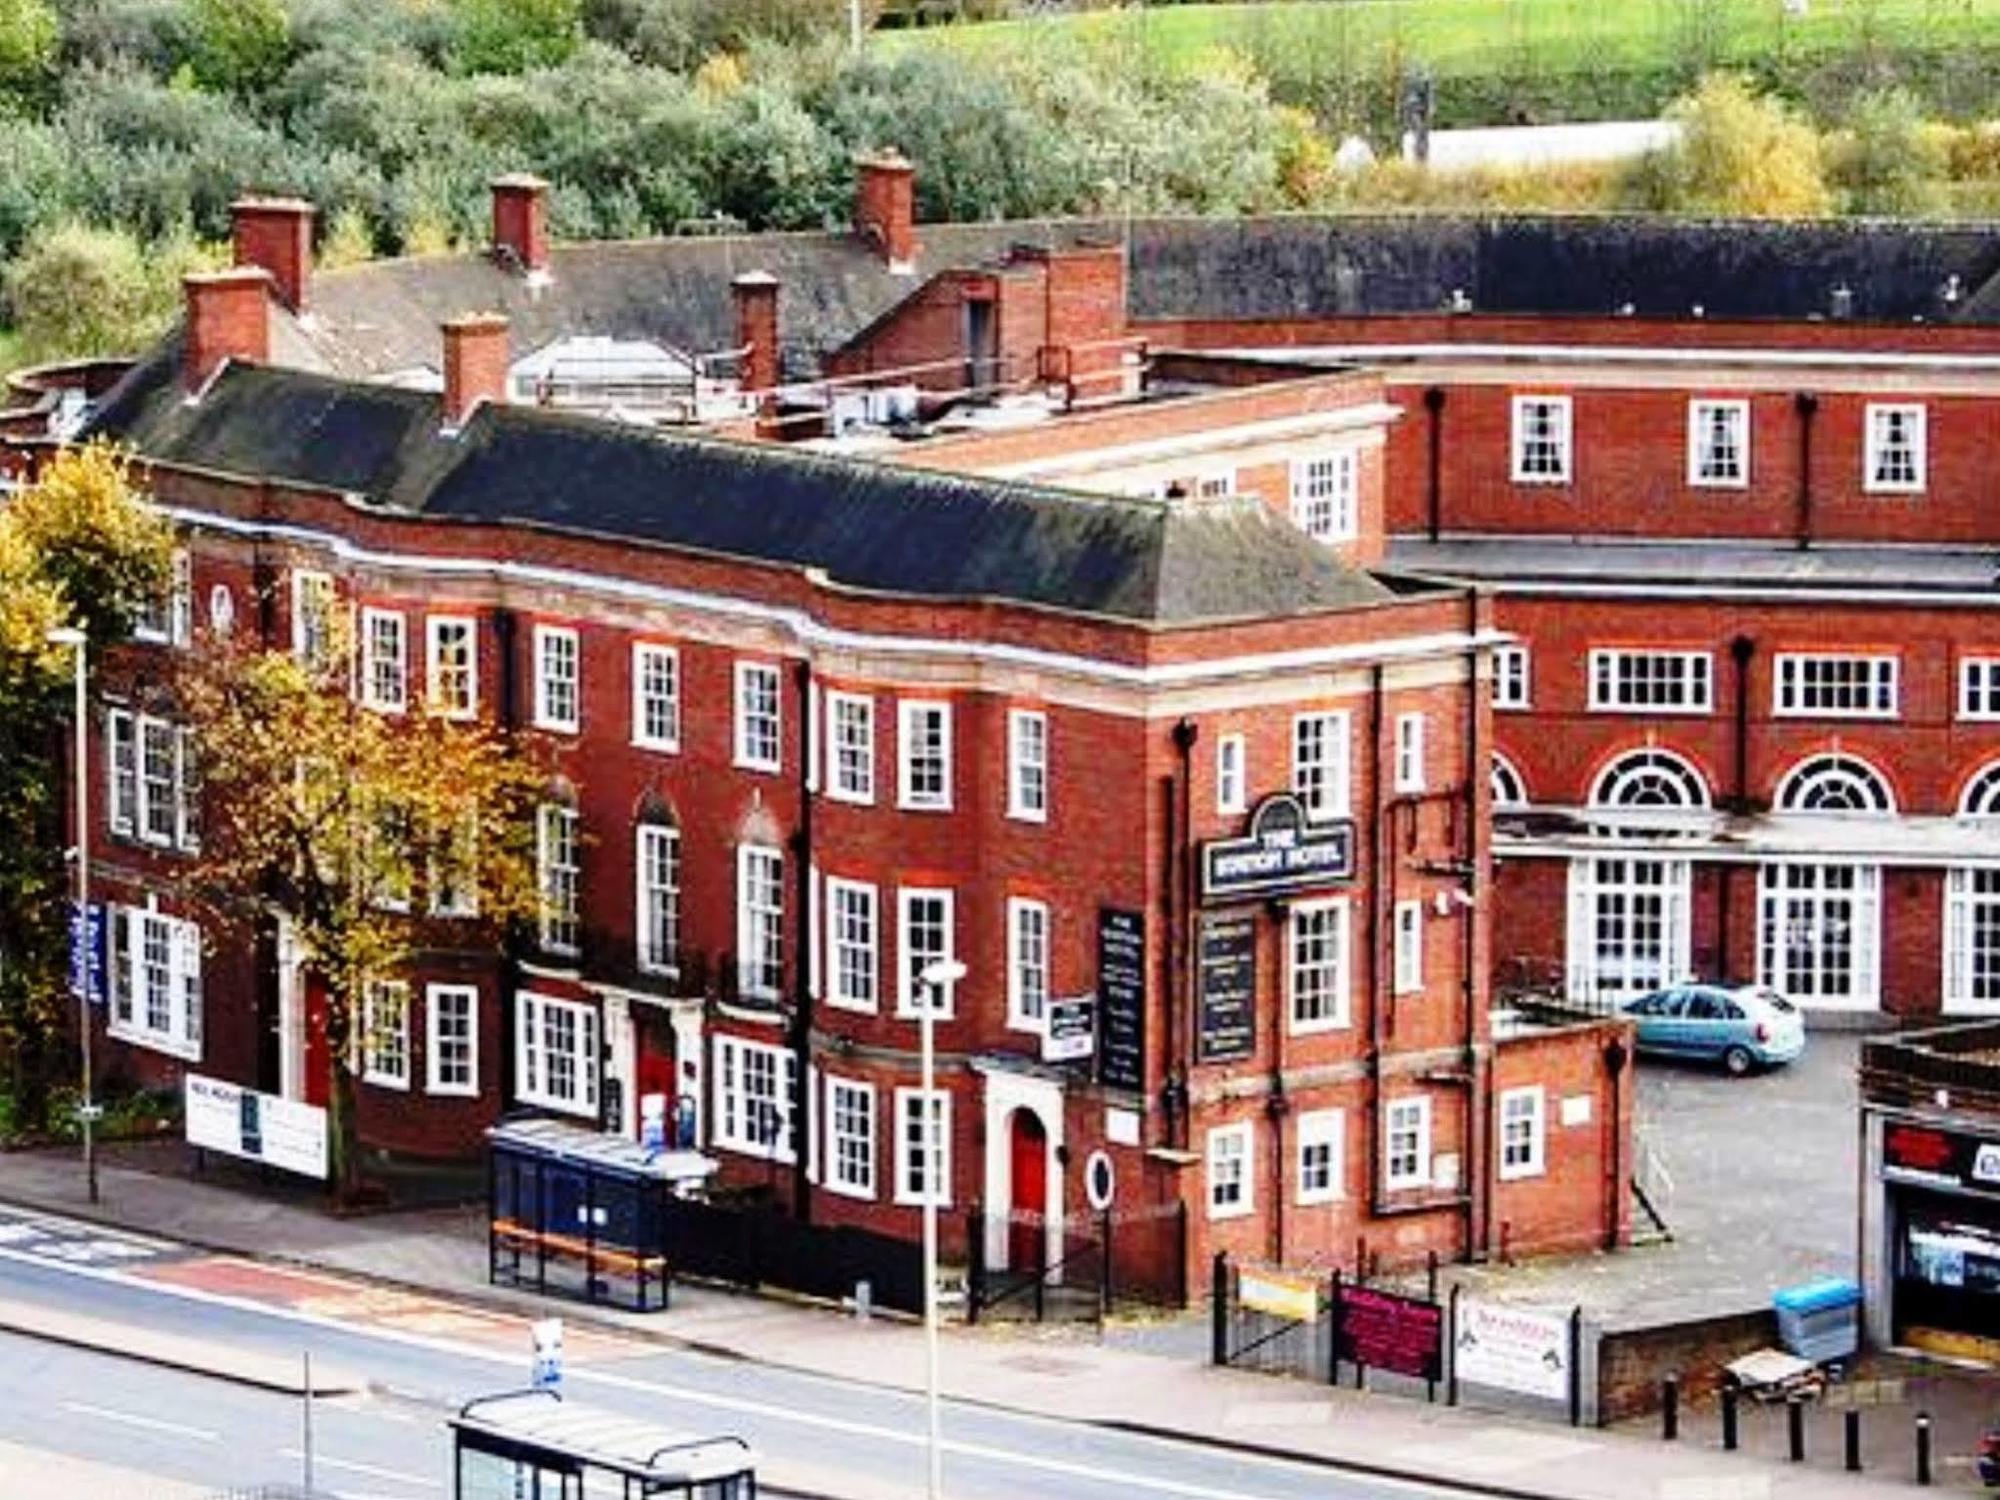 Station Hotel Dudley Exterior photo